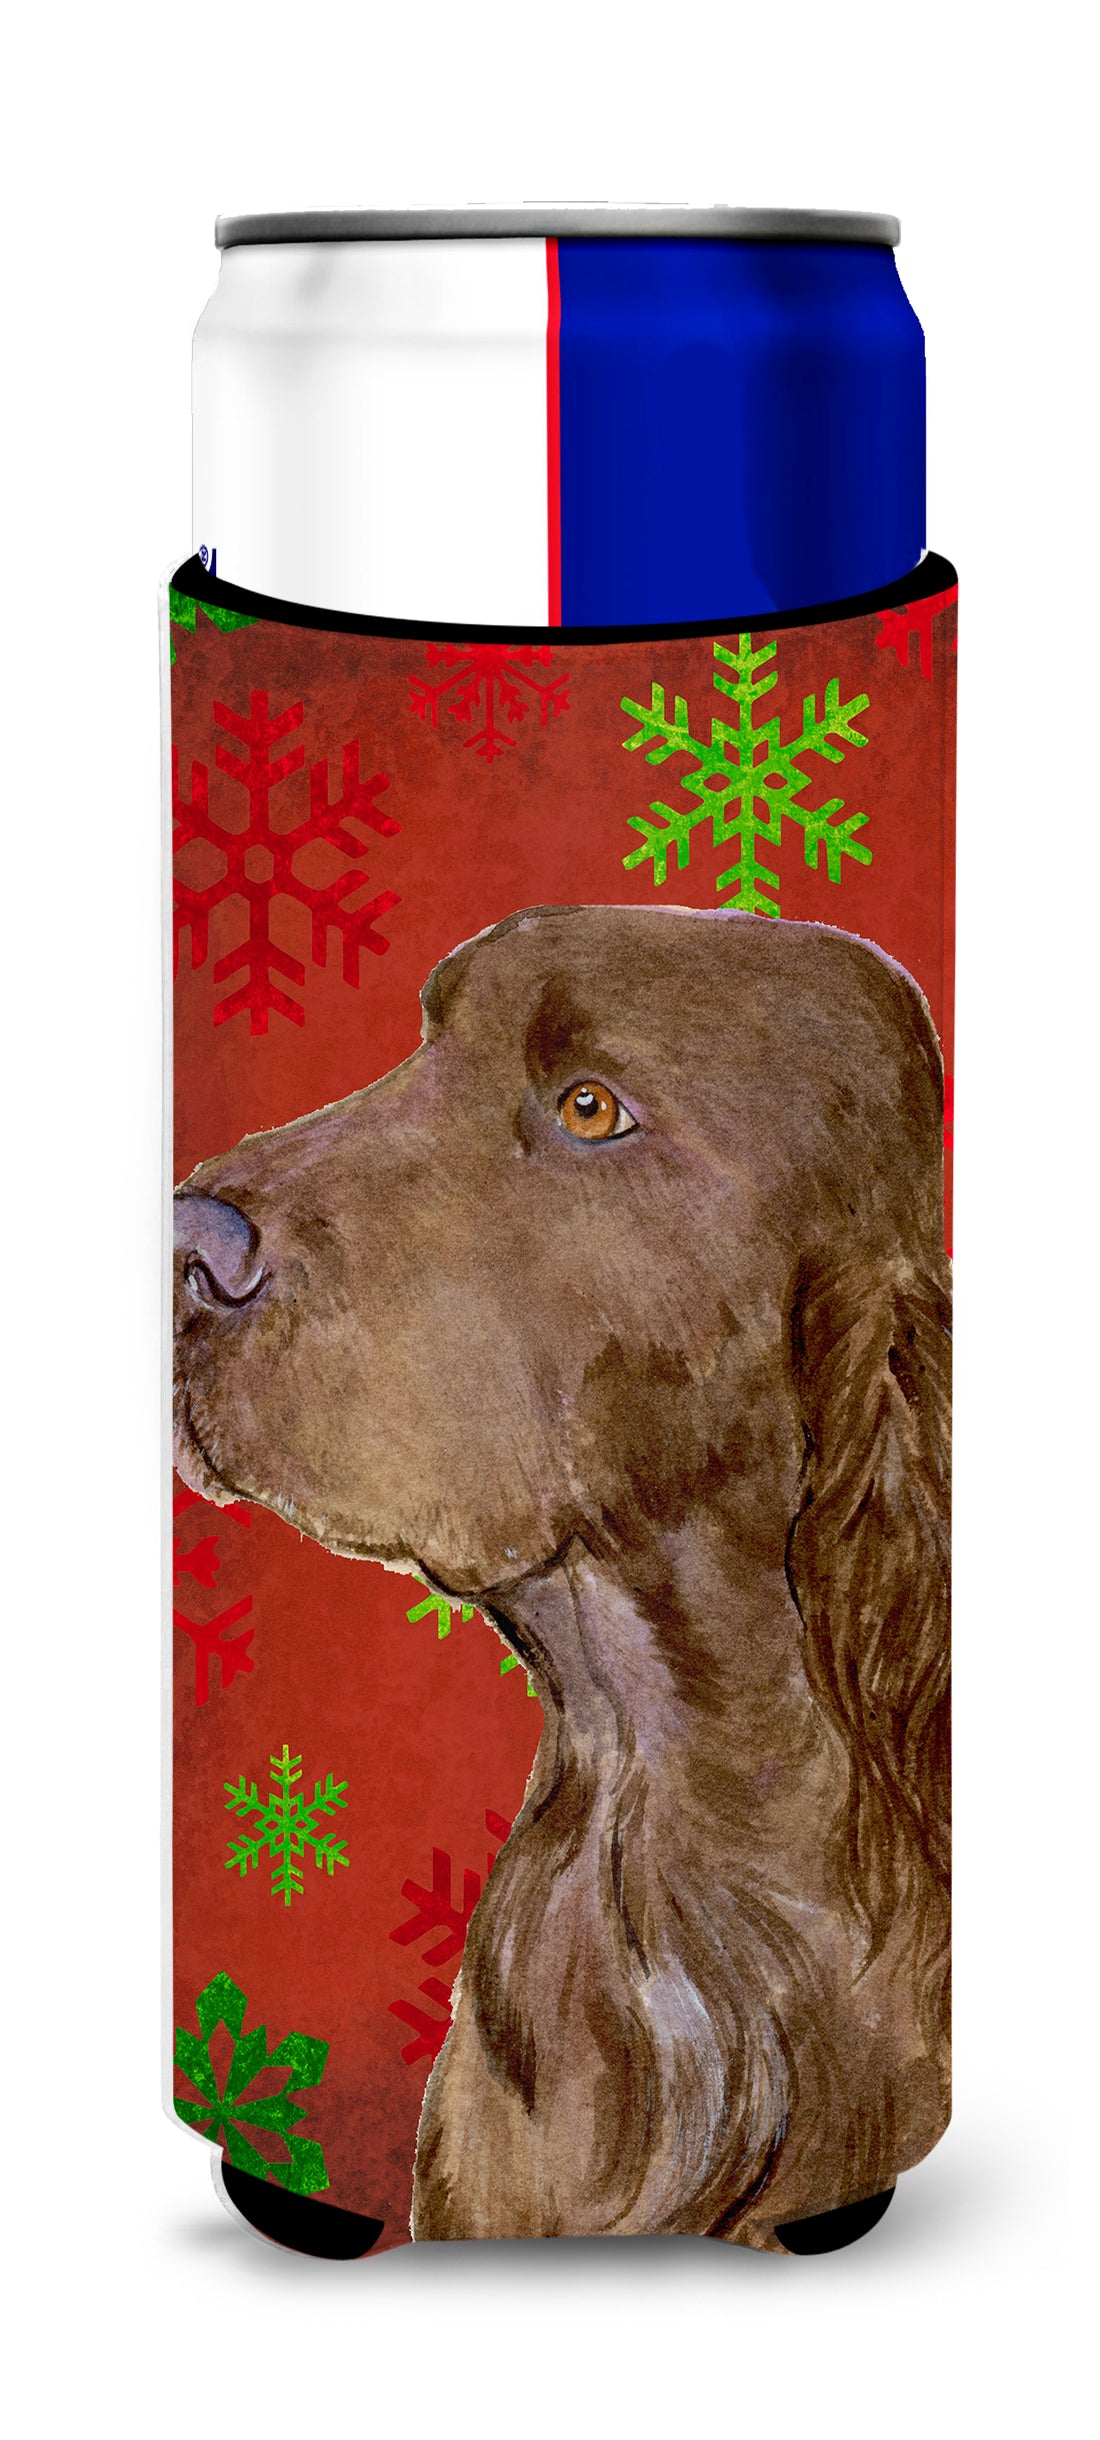 Field Spaniel Red and Green Snowflakes Holiday Christmas Ultra Beverage Insulators for slim cans SS4732MUK.